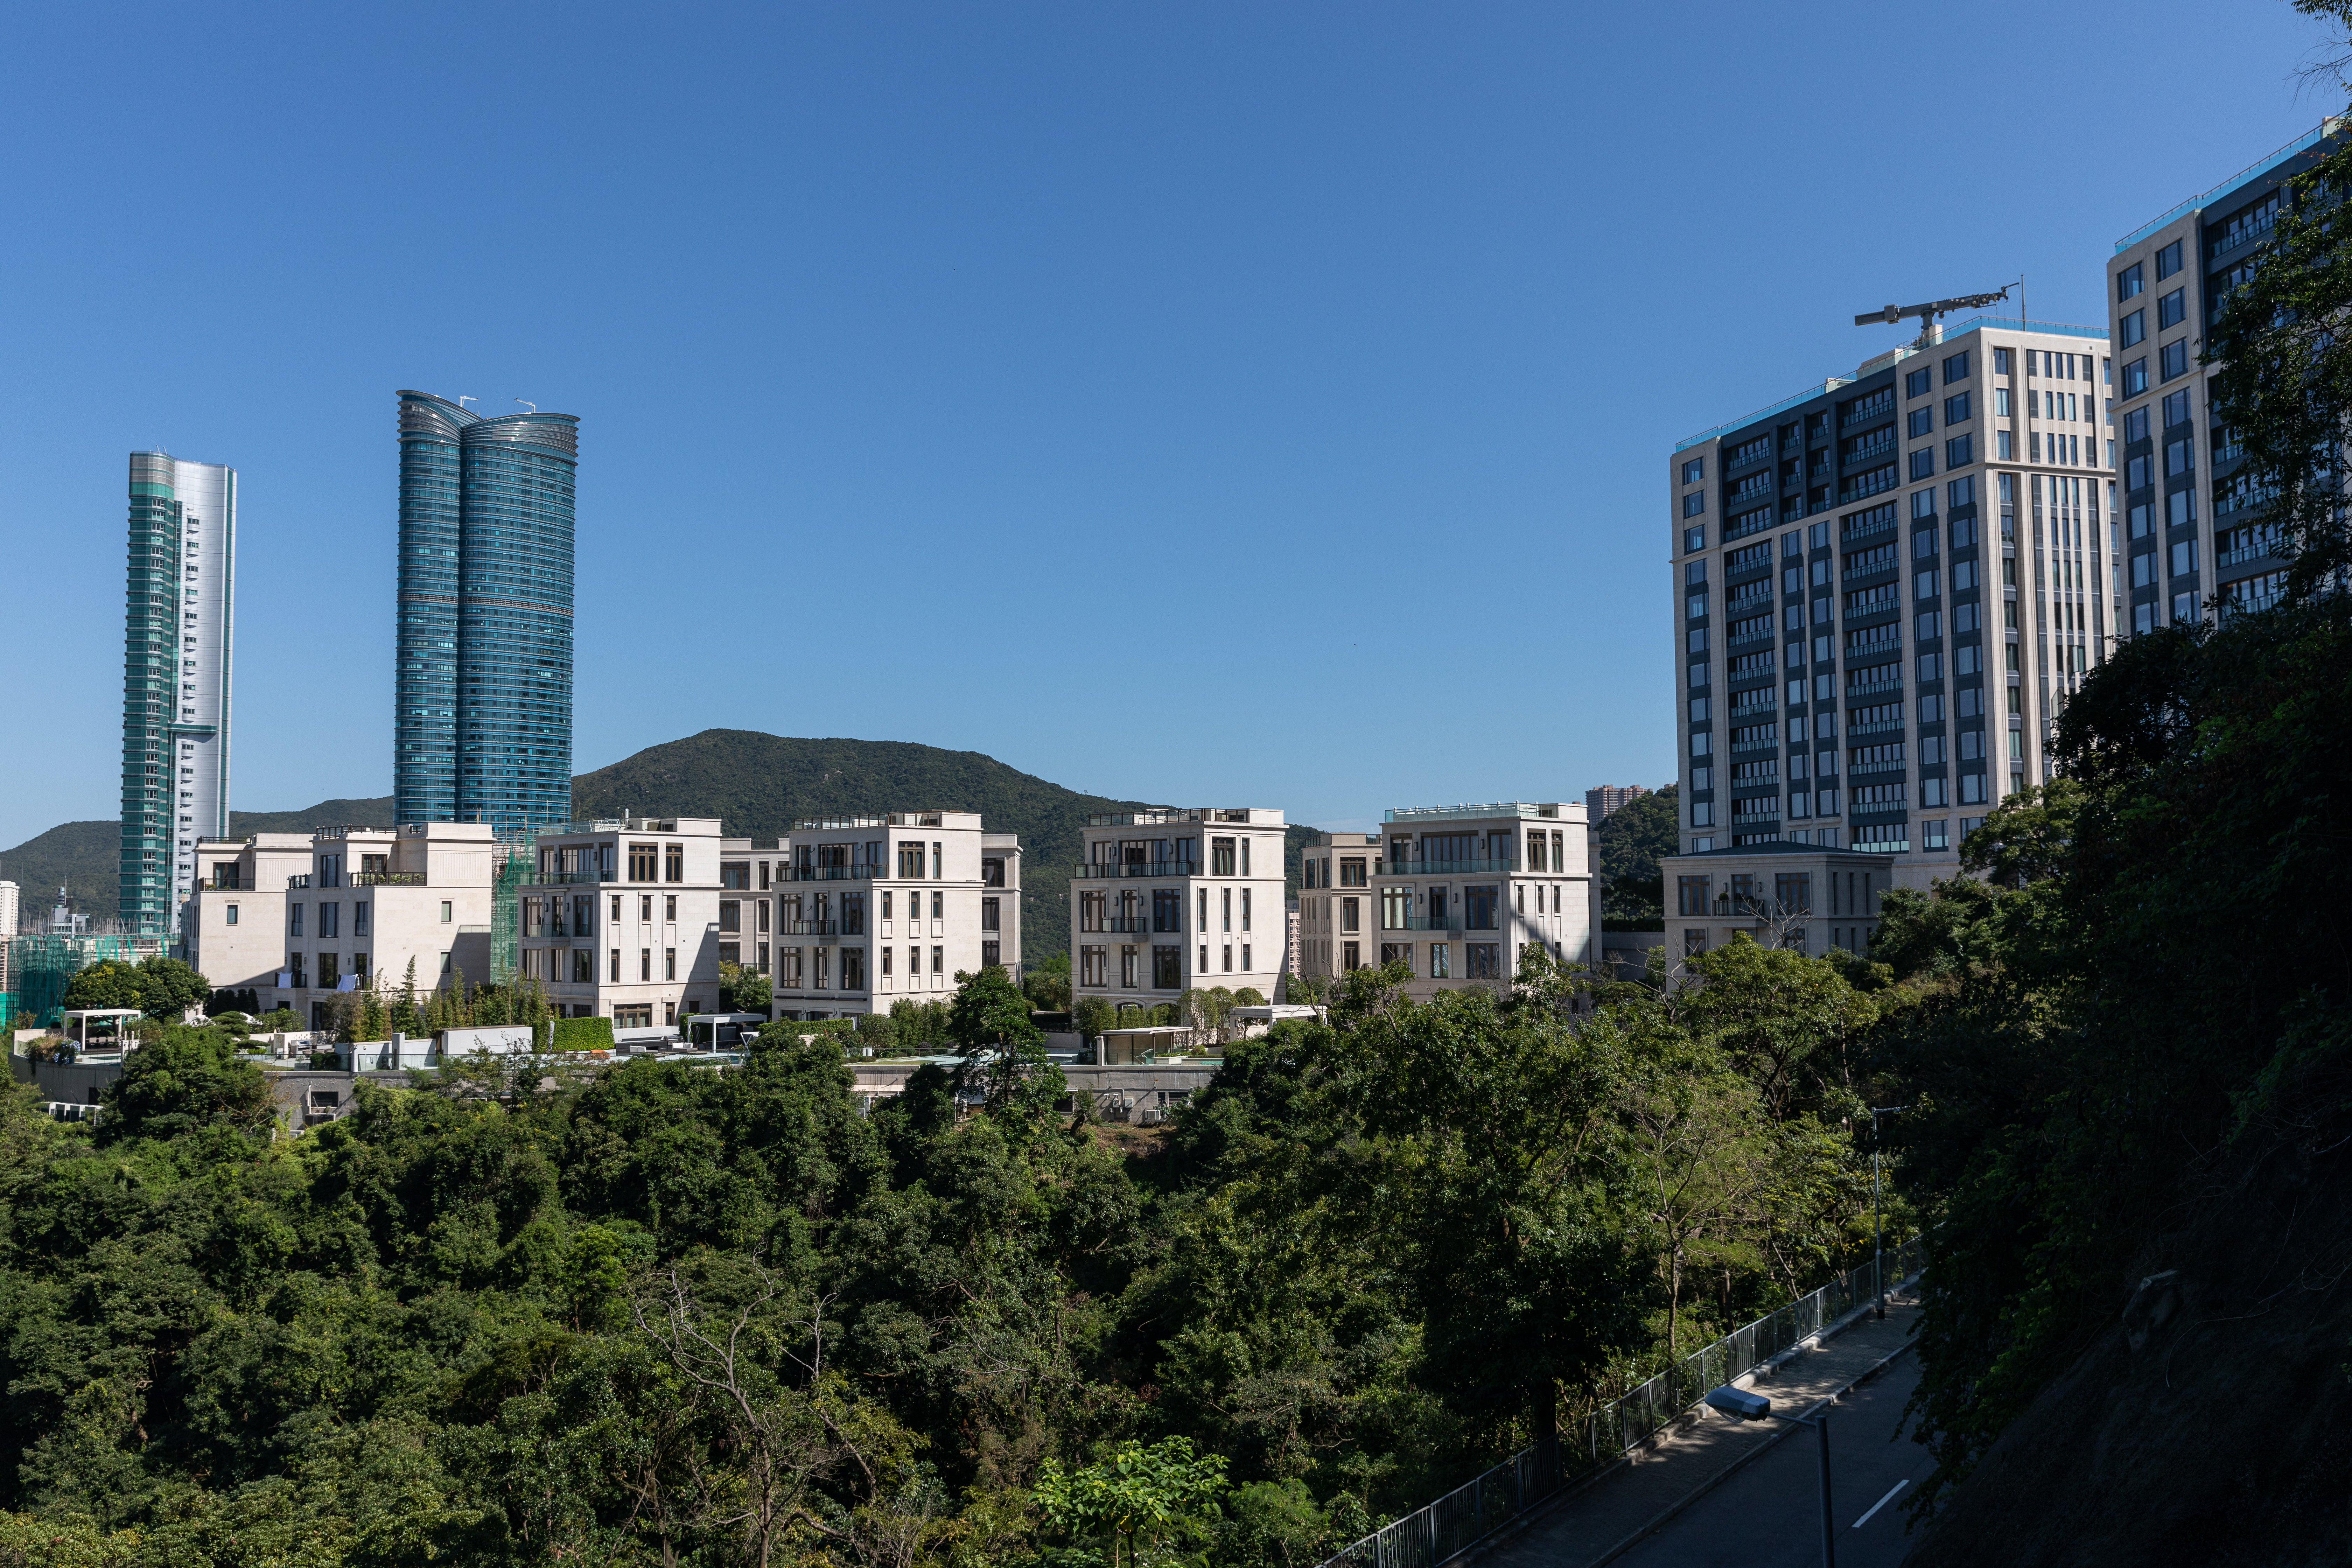 <p>Sale of an apartment in Hong Kong’s Mount Nicholson development (pictured) has seen it become Asia’s most expensive in terms of per square foot</p>